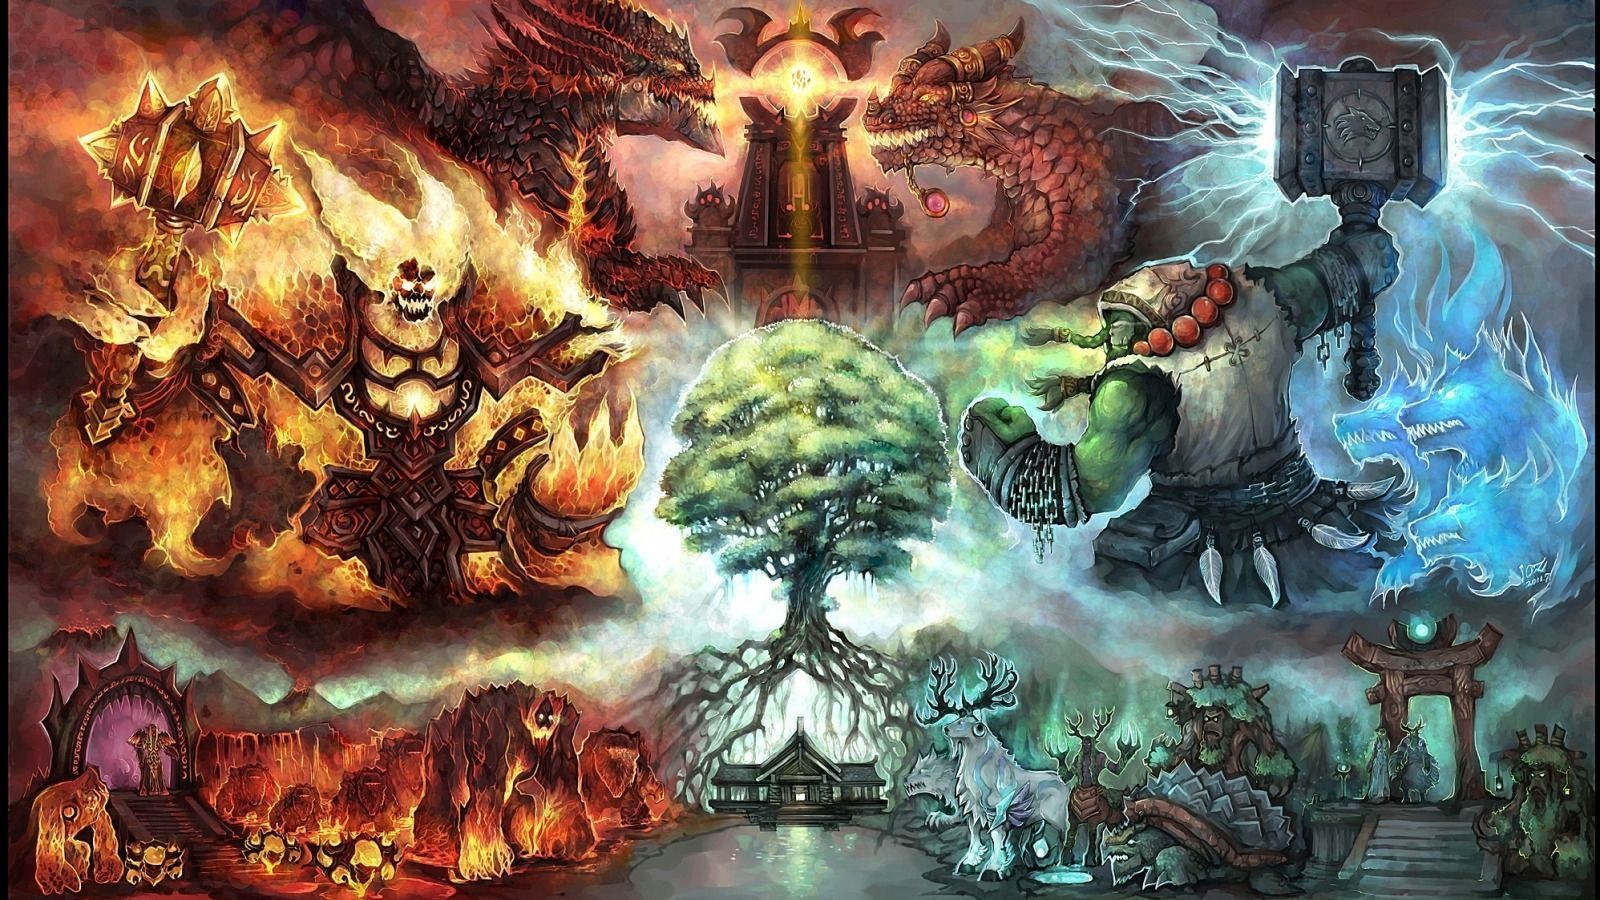 Download wallpaper wow, world of wacraft, cataclysm, thrall and other